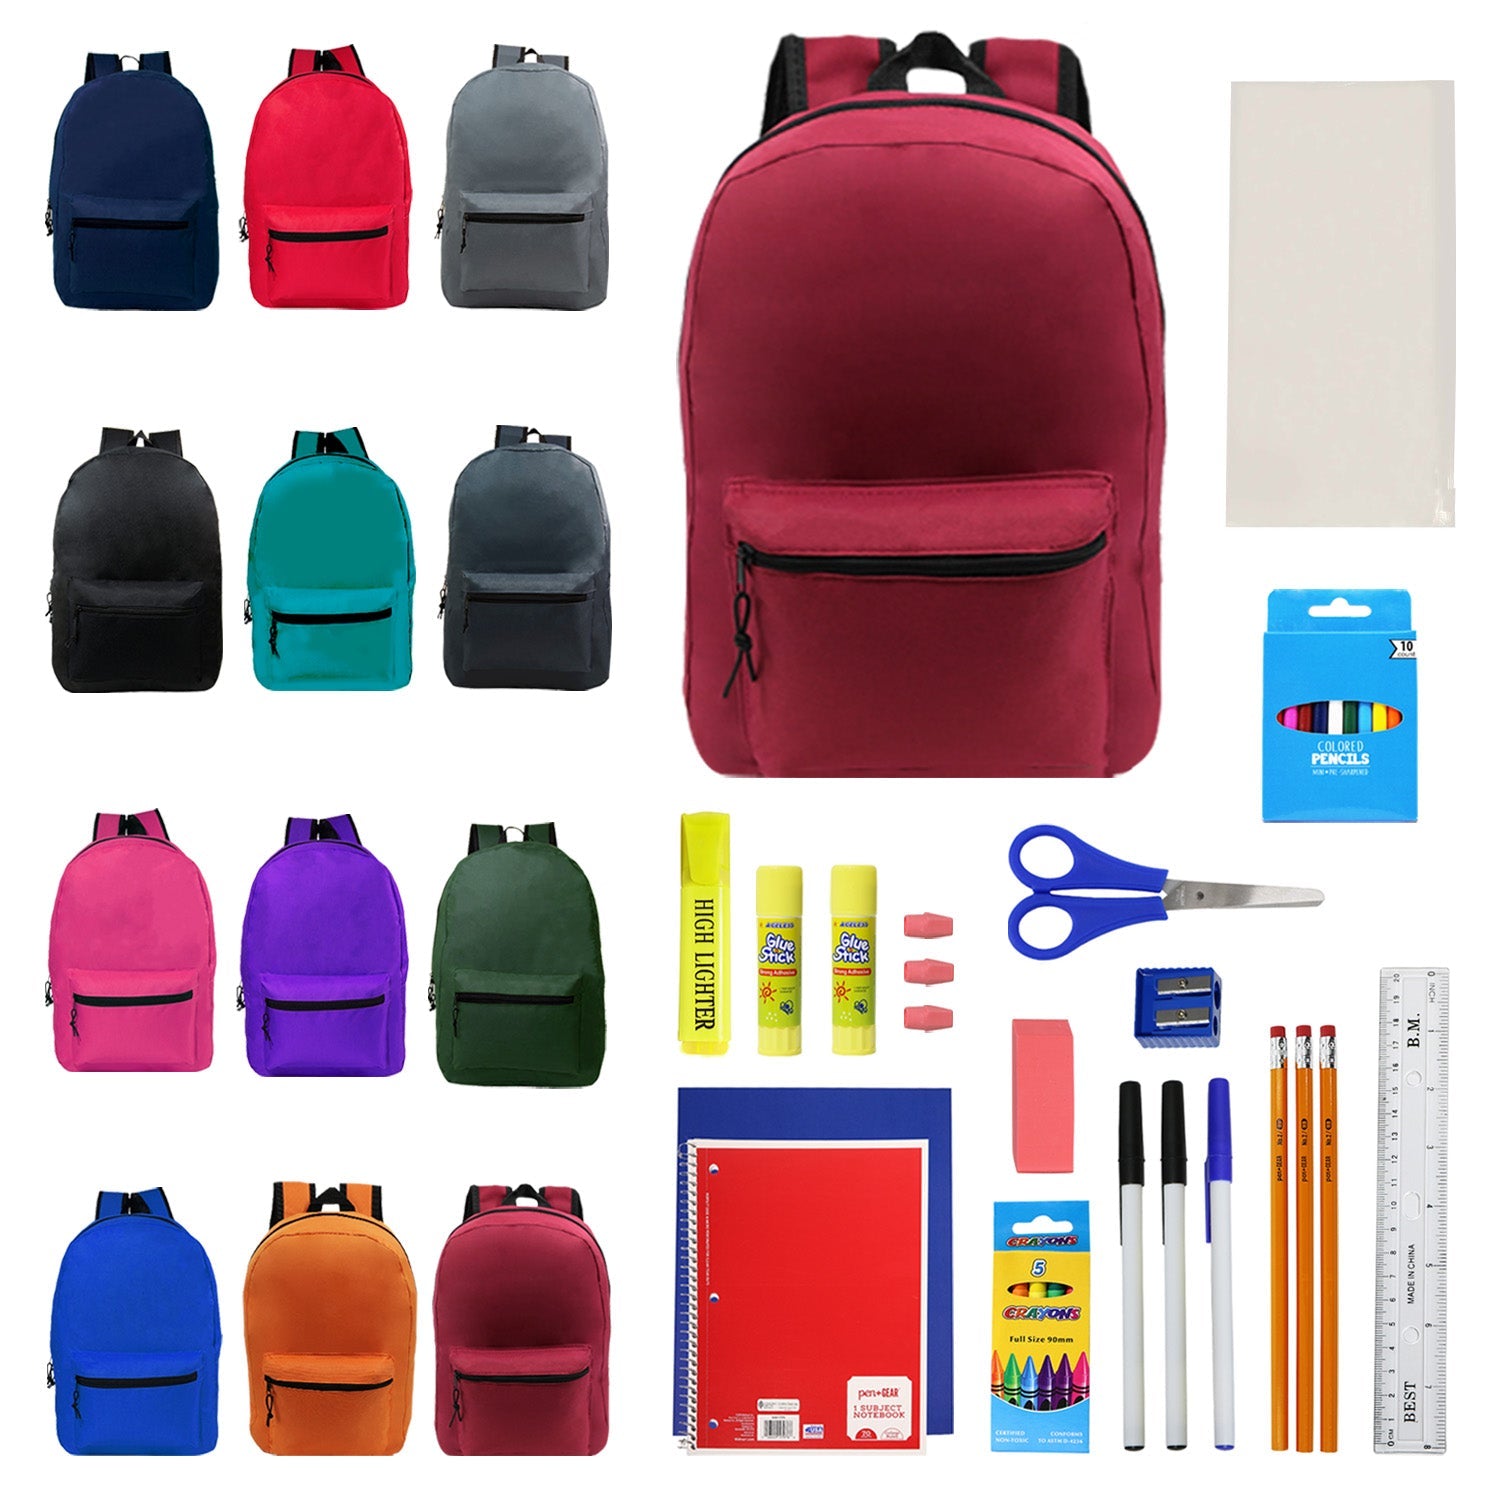 17 Inch Bulk Backpacks in Assorted Colors with School Supply Kits Wholesale - Case of 24 (12 Color Assortment)